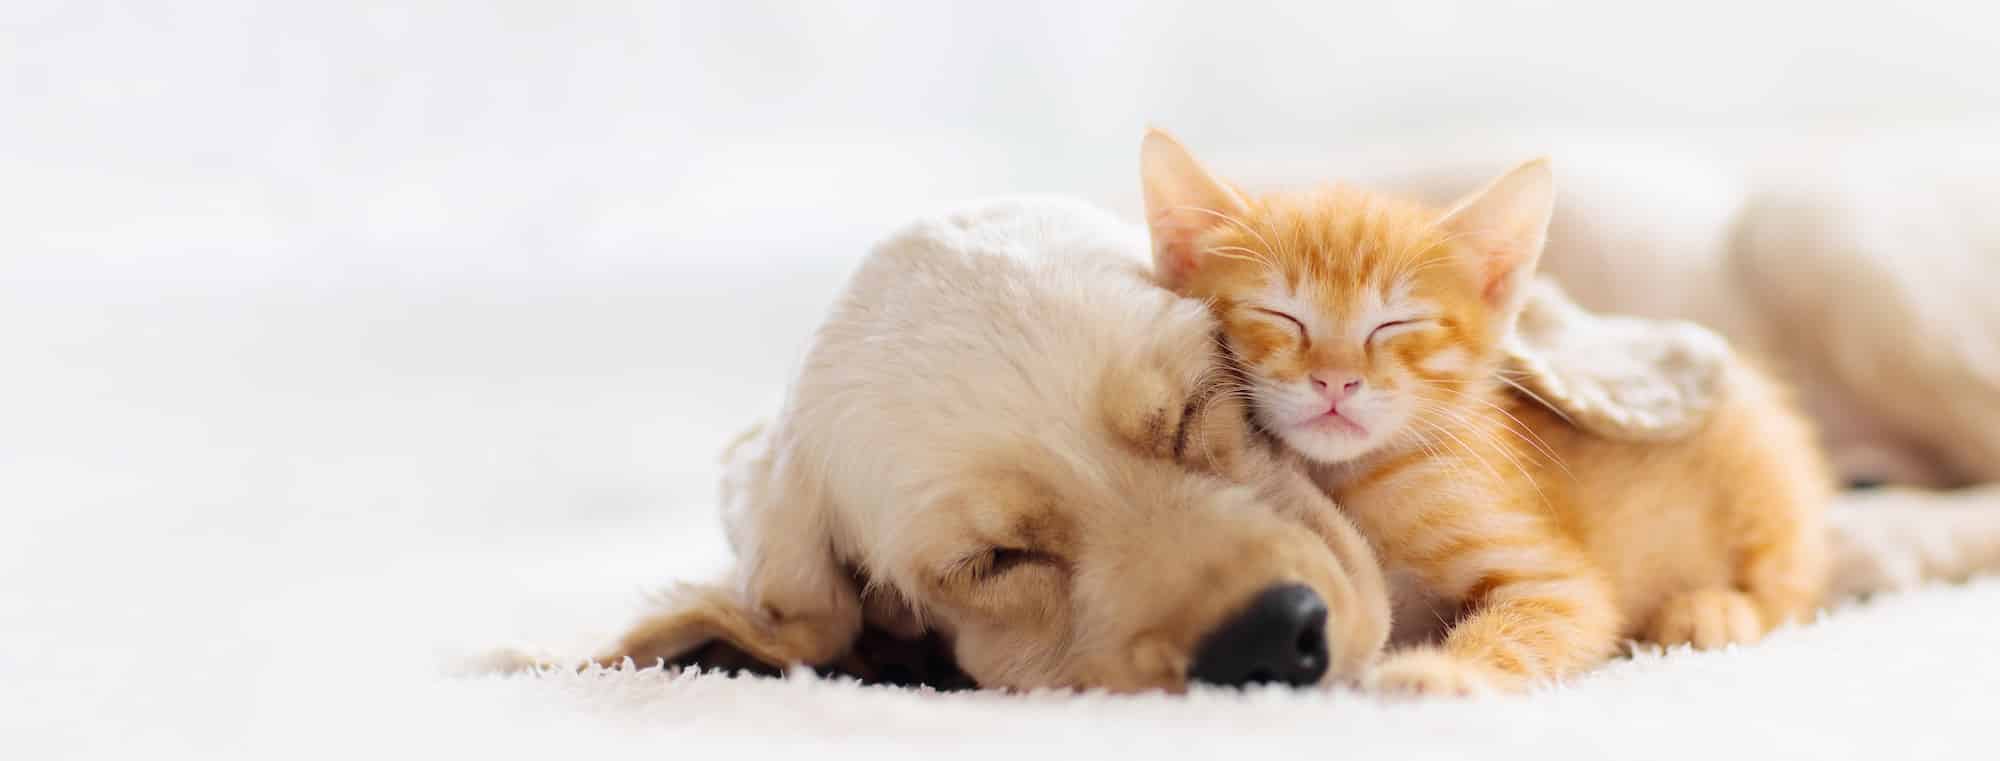 image of dog and cat together